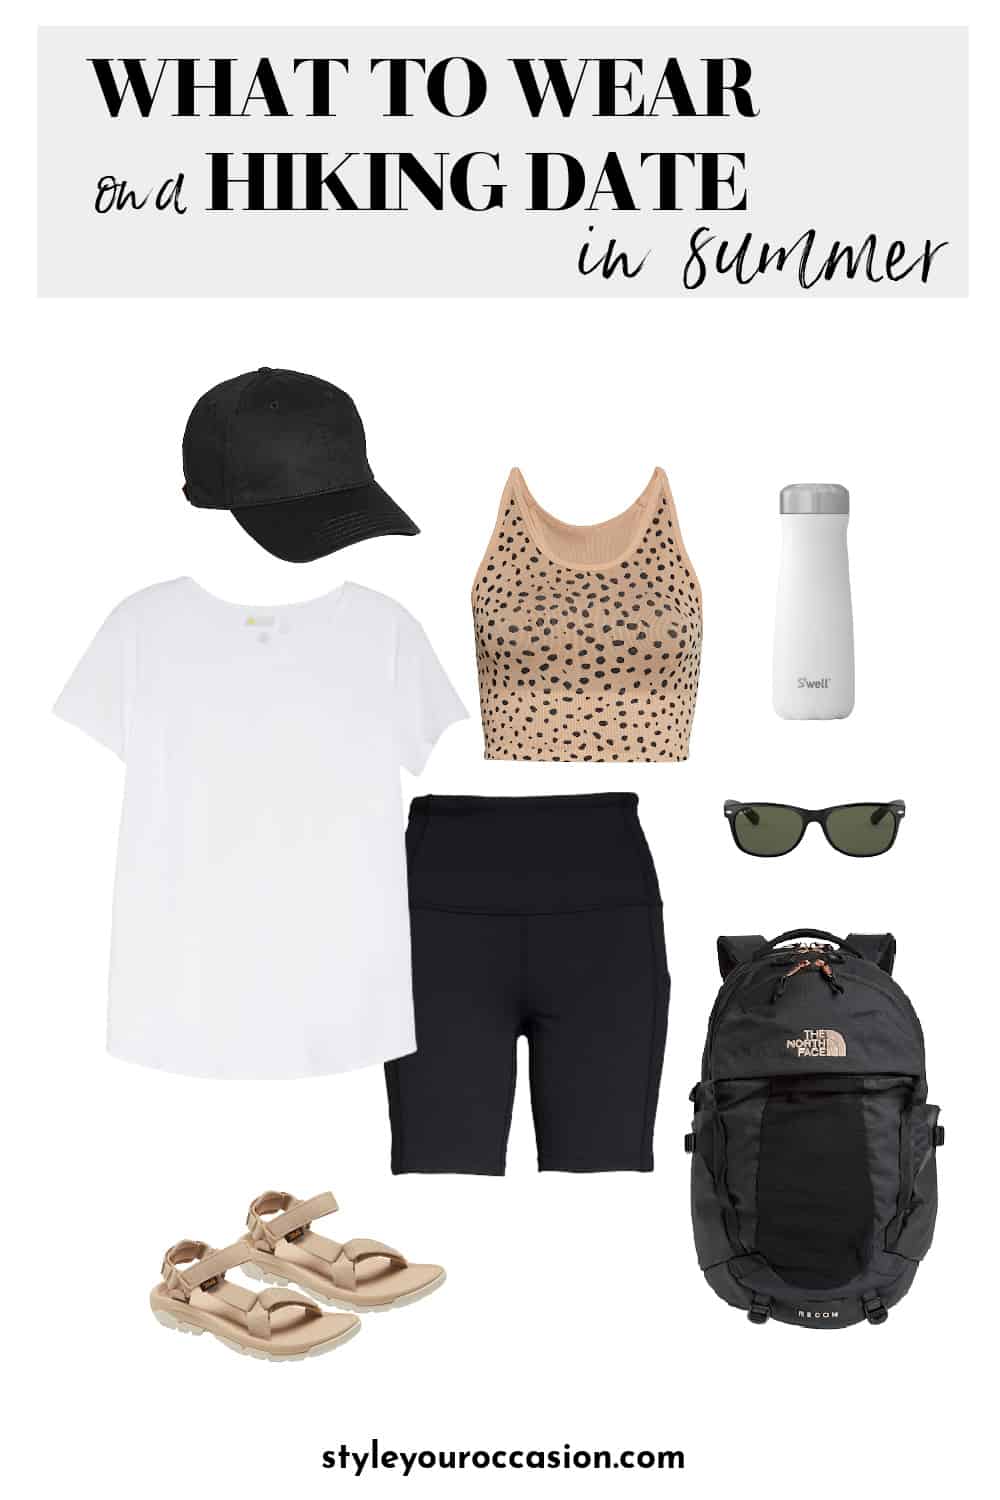 What To Wear On A Hiking Date in Summer